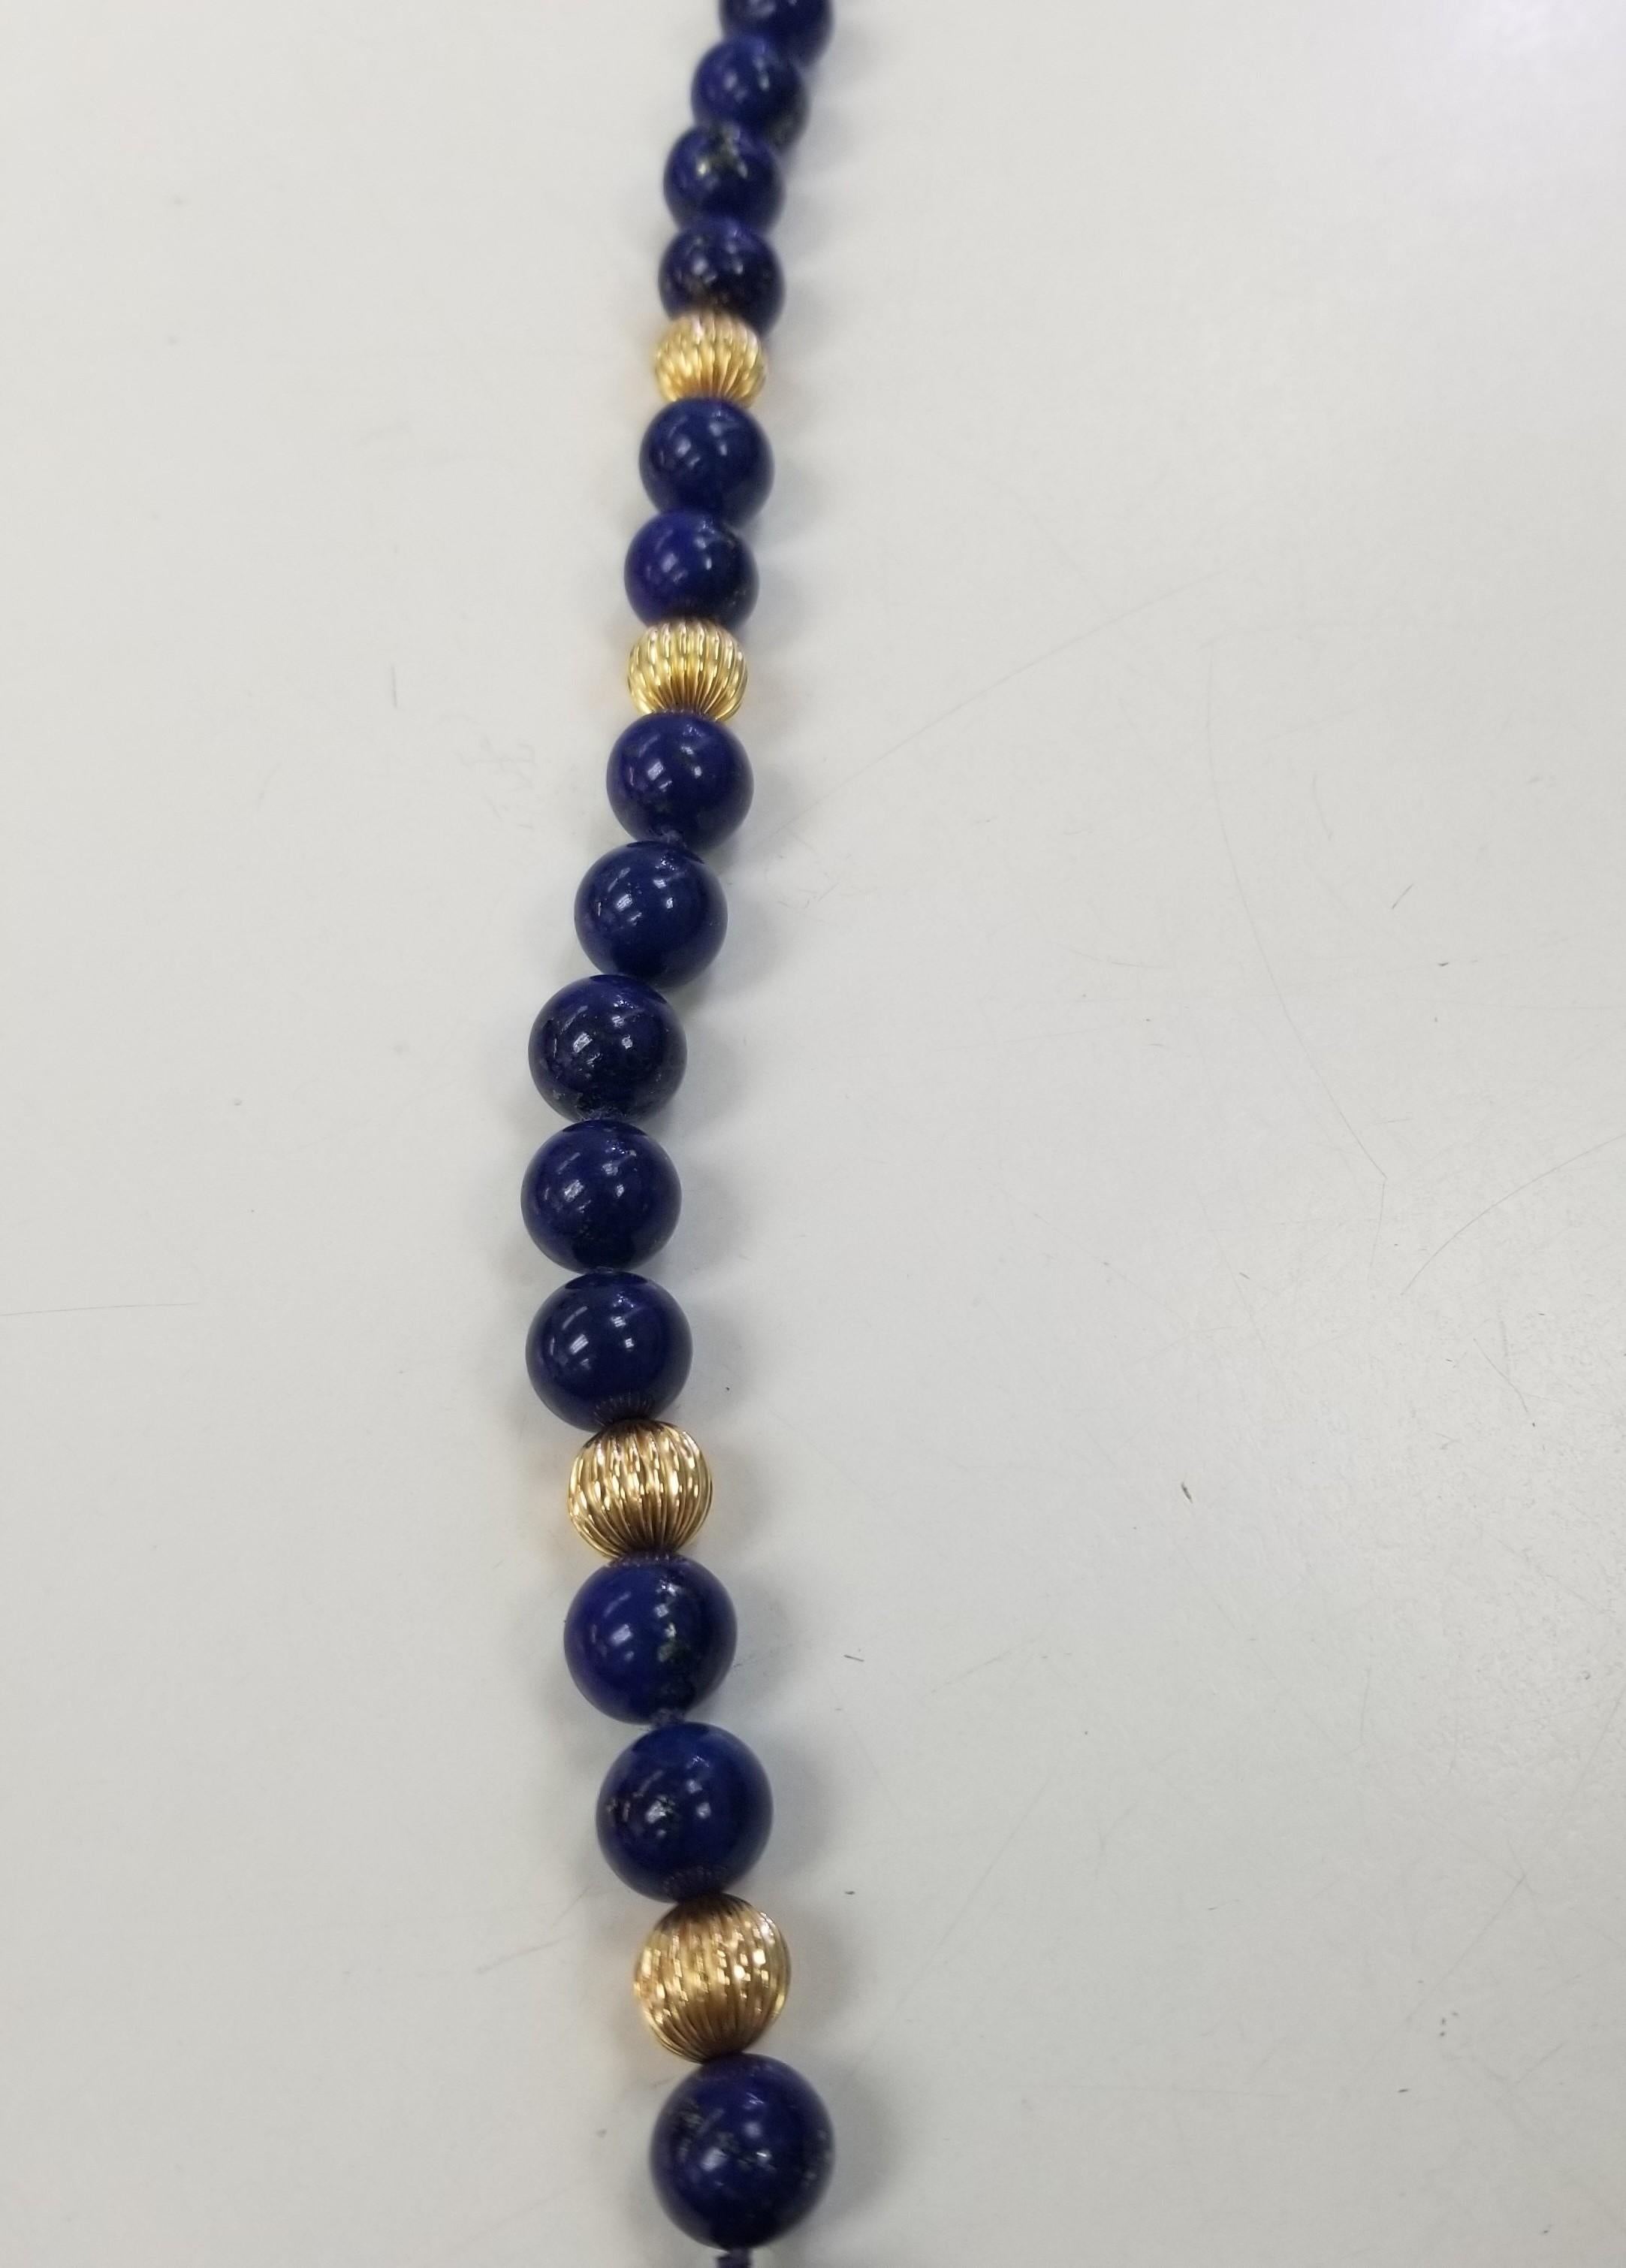 Lapis Lazuli 9.5 - 10mm Beads with 14k yellow gold Rondelle Necklace 36 inches In Excellent Condition For Sale In Los Angeles, CA